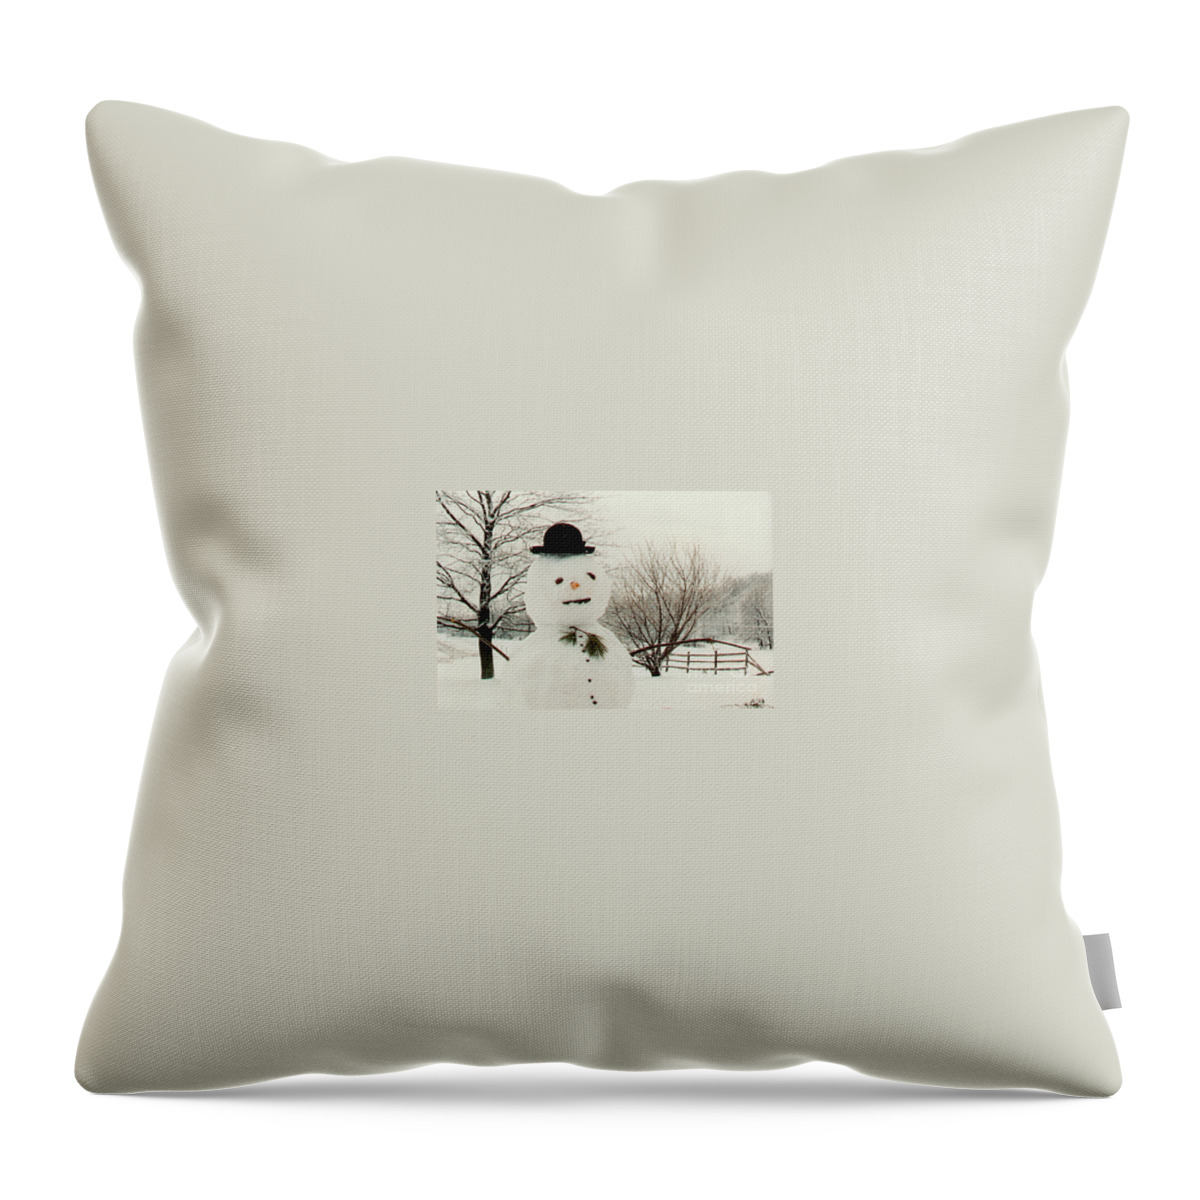 Winter Throw Pillow featuring the photograph Snowman Enjoying a Snowy Day by Anna Lisa Yoder